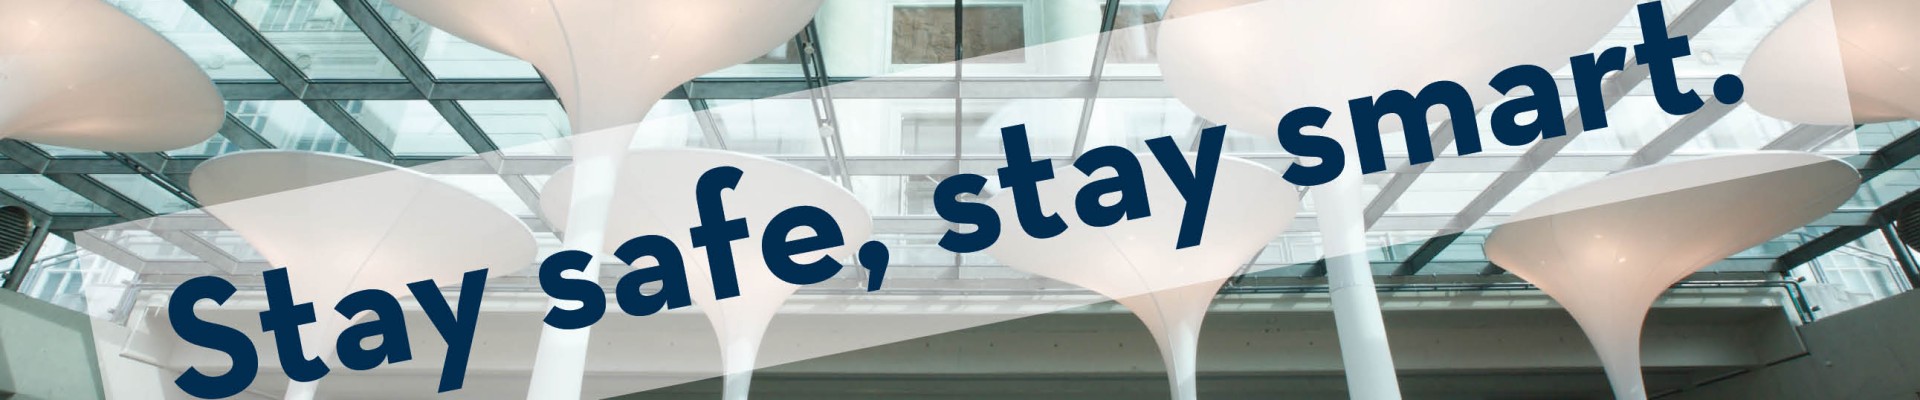 : Entrance hall with slogan "Stay safe, stay smart."